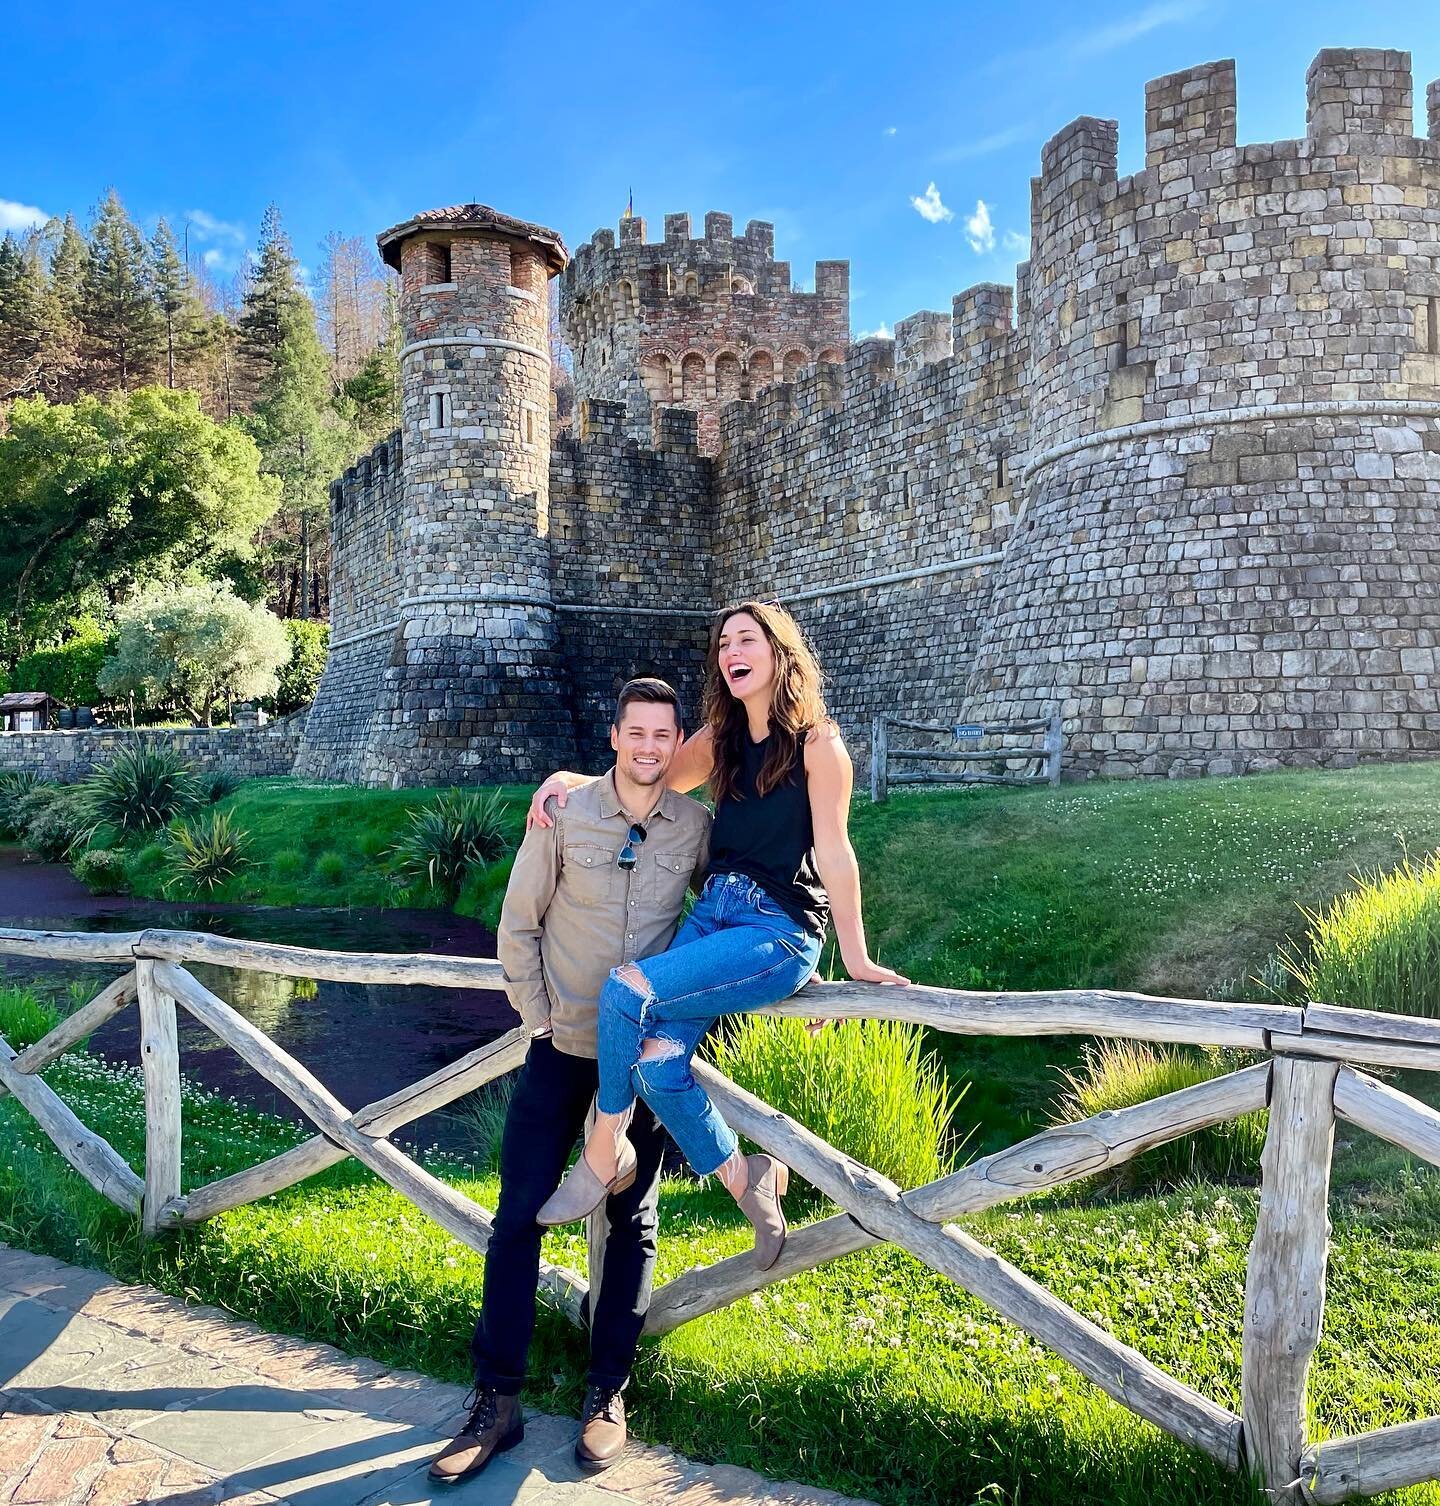 Castles 🏰 + Wine🍷 + Love ❤️ = Lots of laughter 🤣🥰🤣 

I love that our girls got your laughter &amp; sense of humor 🥰
-
Thx @hannah_claire_photography for capturing the moment (and all of our goofiness) 📸👌🤪
- 

-

-

-
 #marriedlife #napa #nap